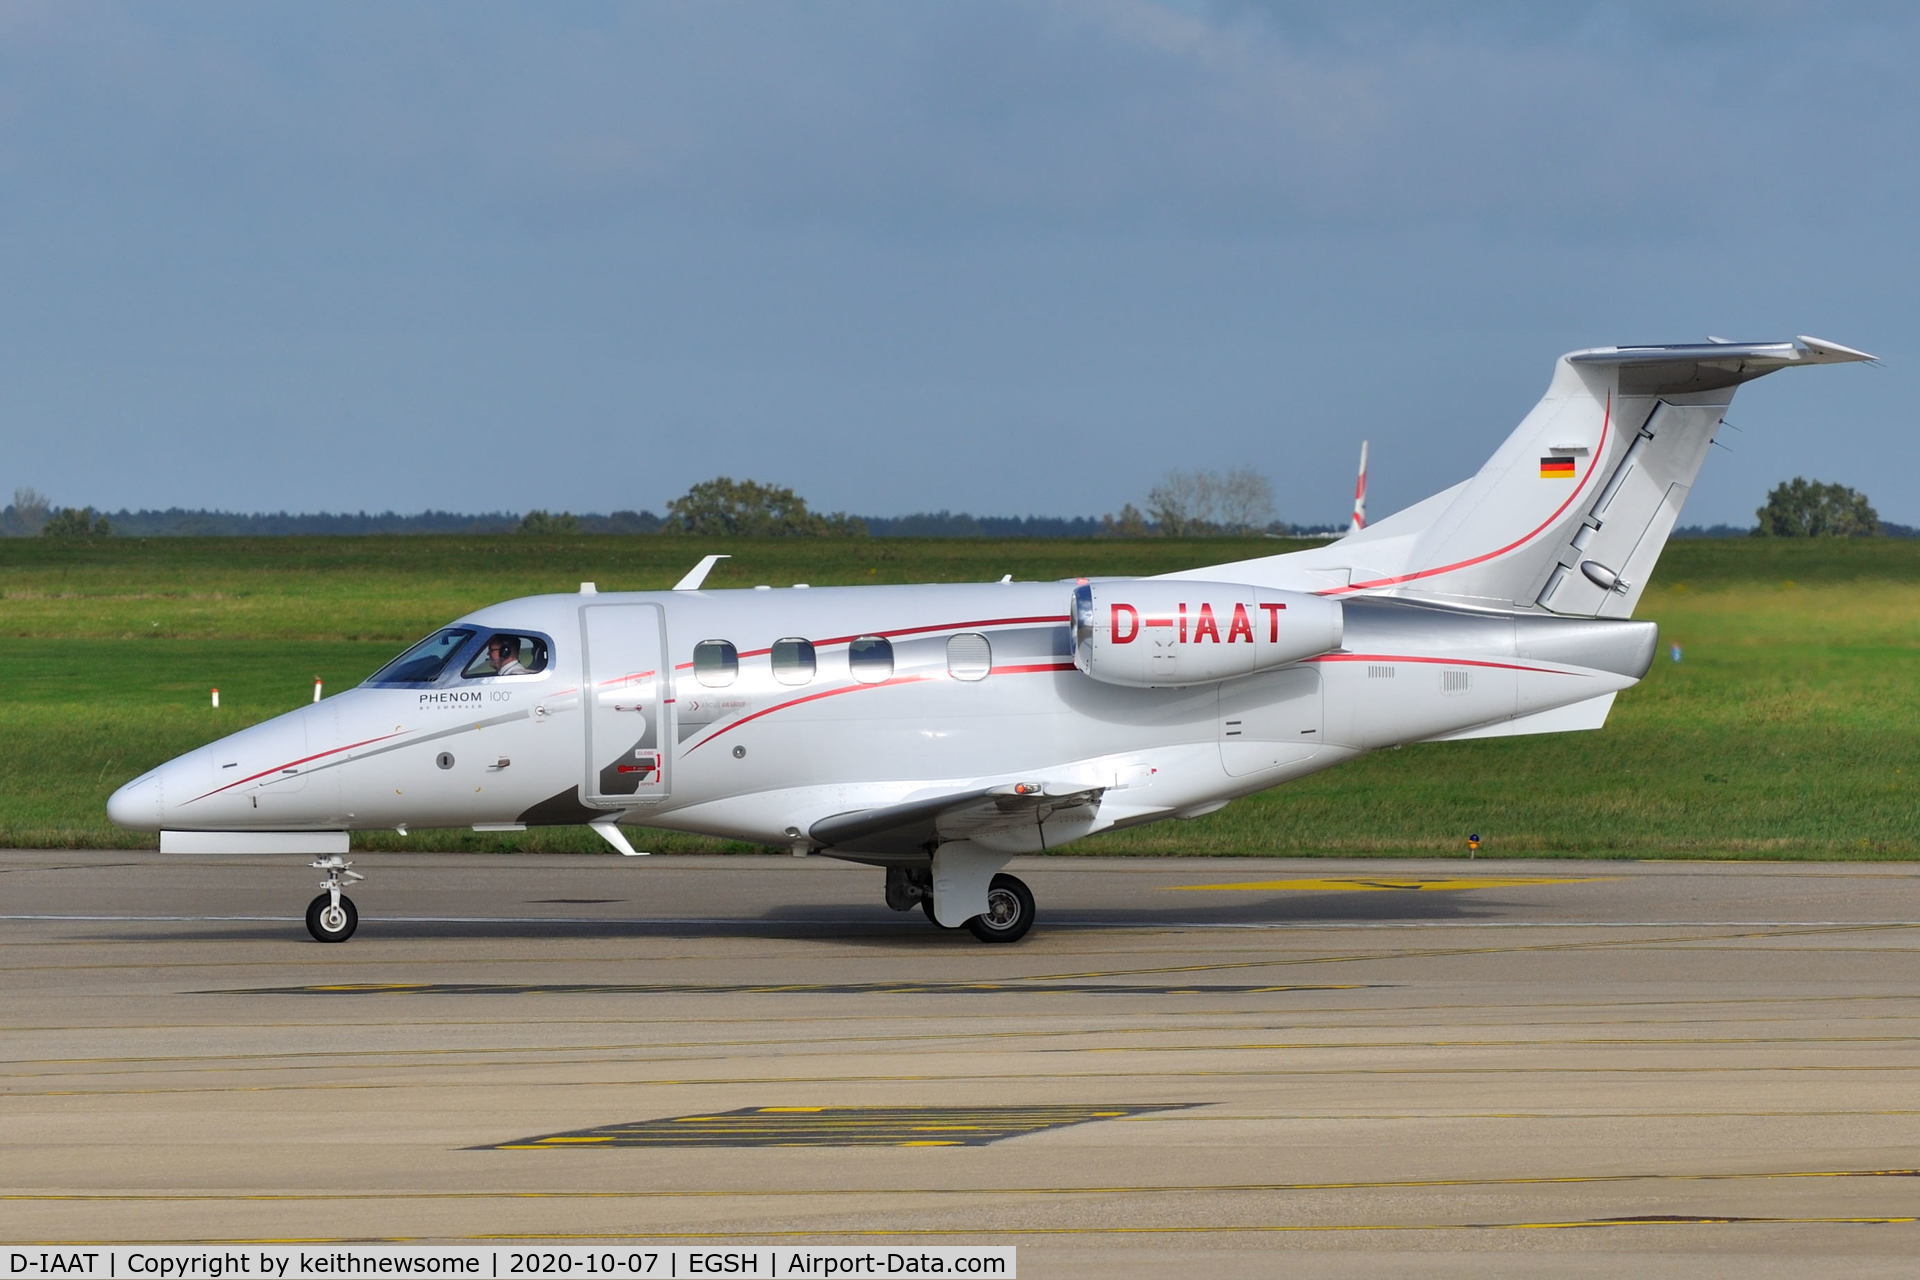 D-IAAT, 2010 Embraer EMB-500 Phenom 100 C/N 50000162, Arriving at Norwich from Paris Le Bourget.